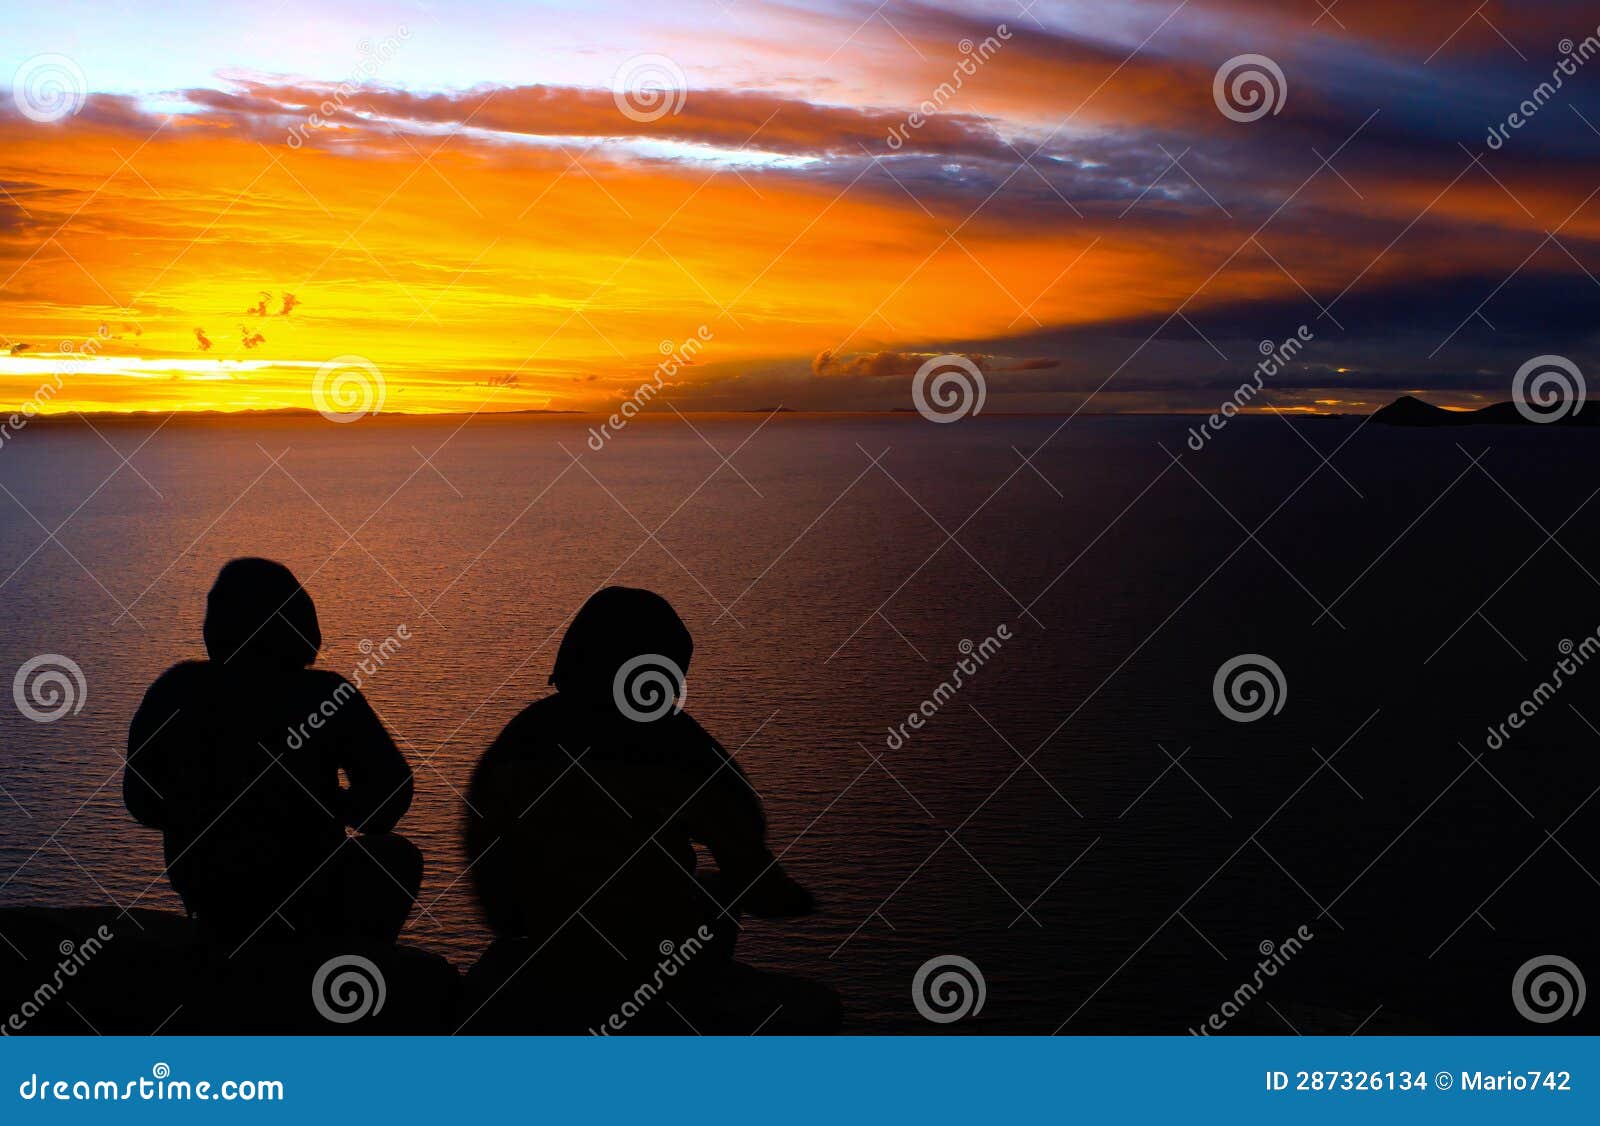 sunset on the titicaca side, being observed by two people